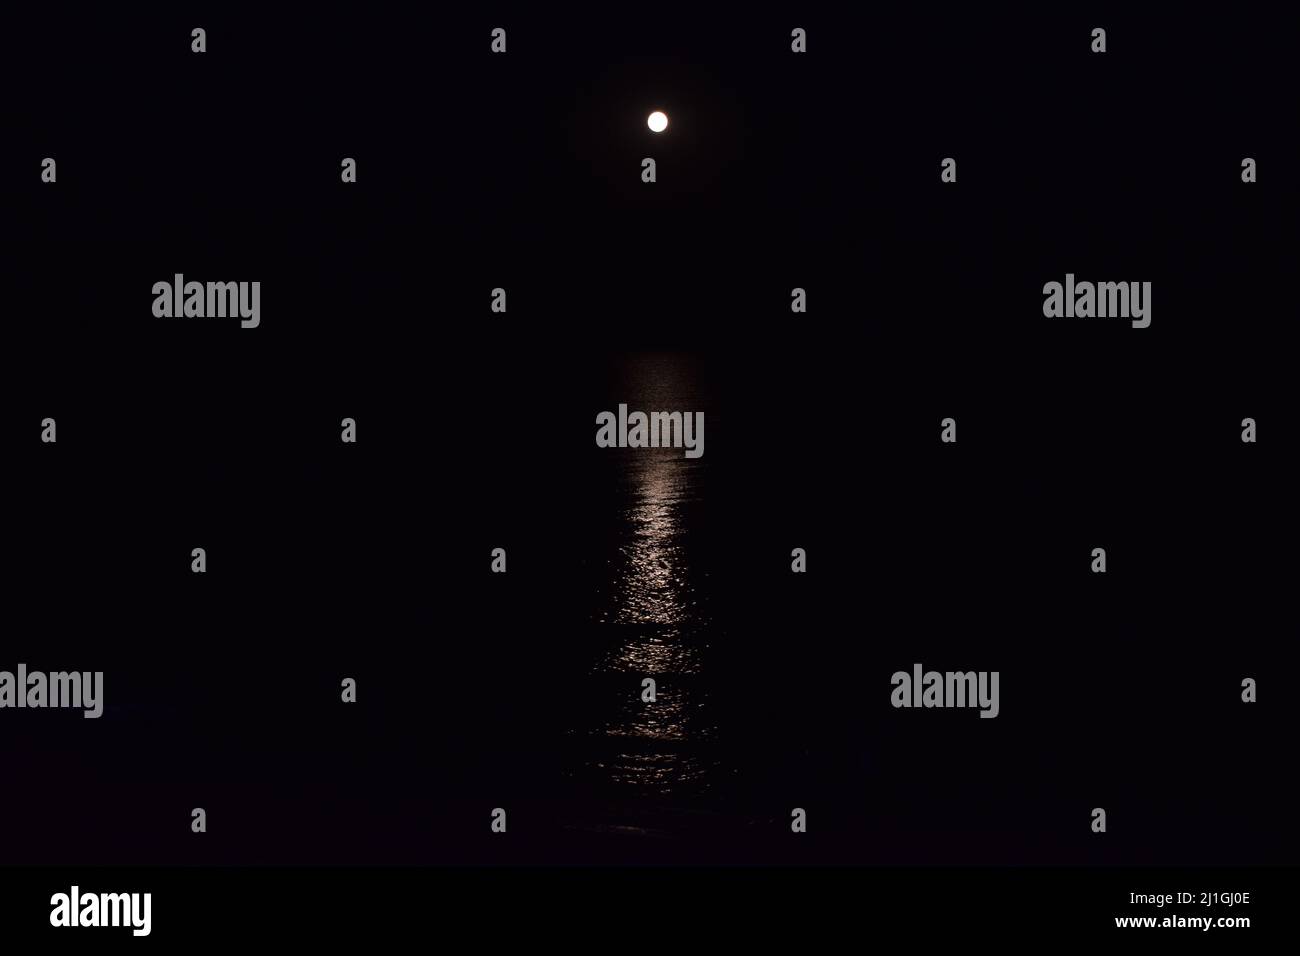 The full moon on the beach. The moon track is reflected in the water. The night moon came up over the water. Full moon on the beach. Full moon at nigh Stock Photo